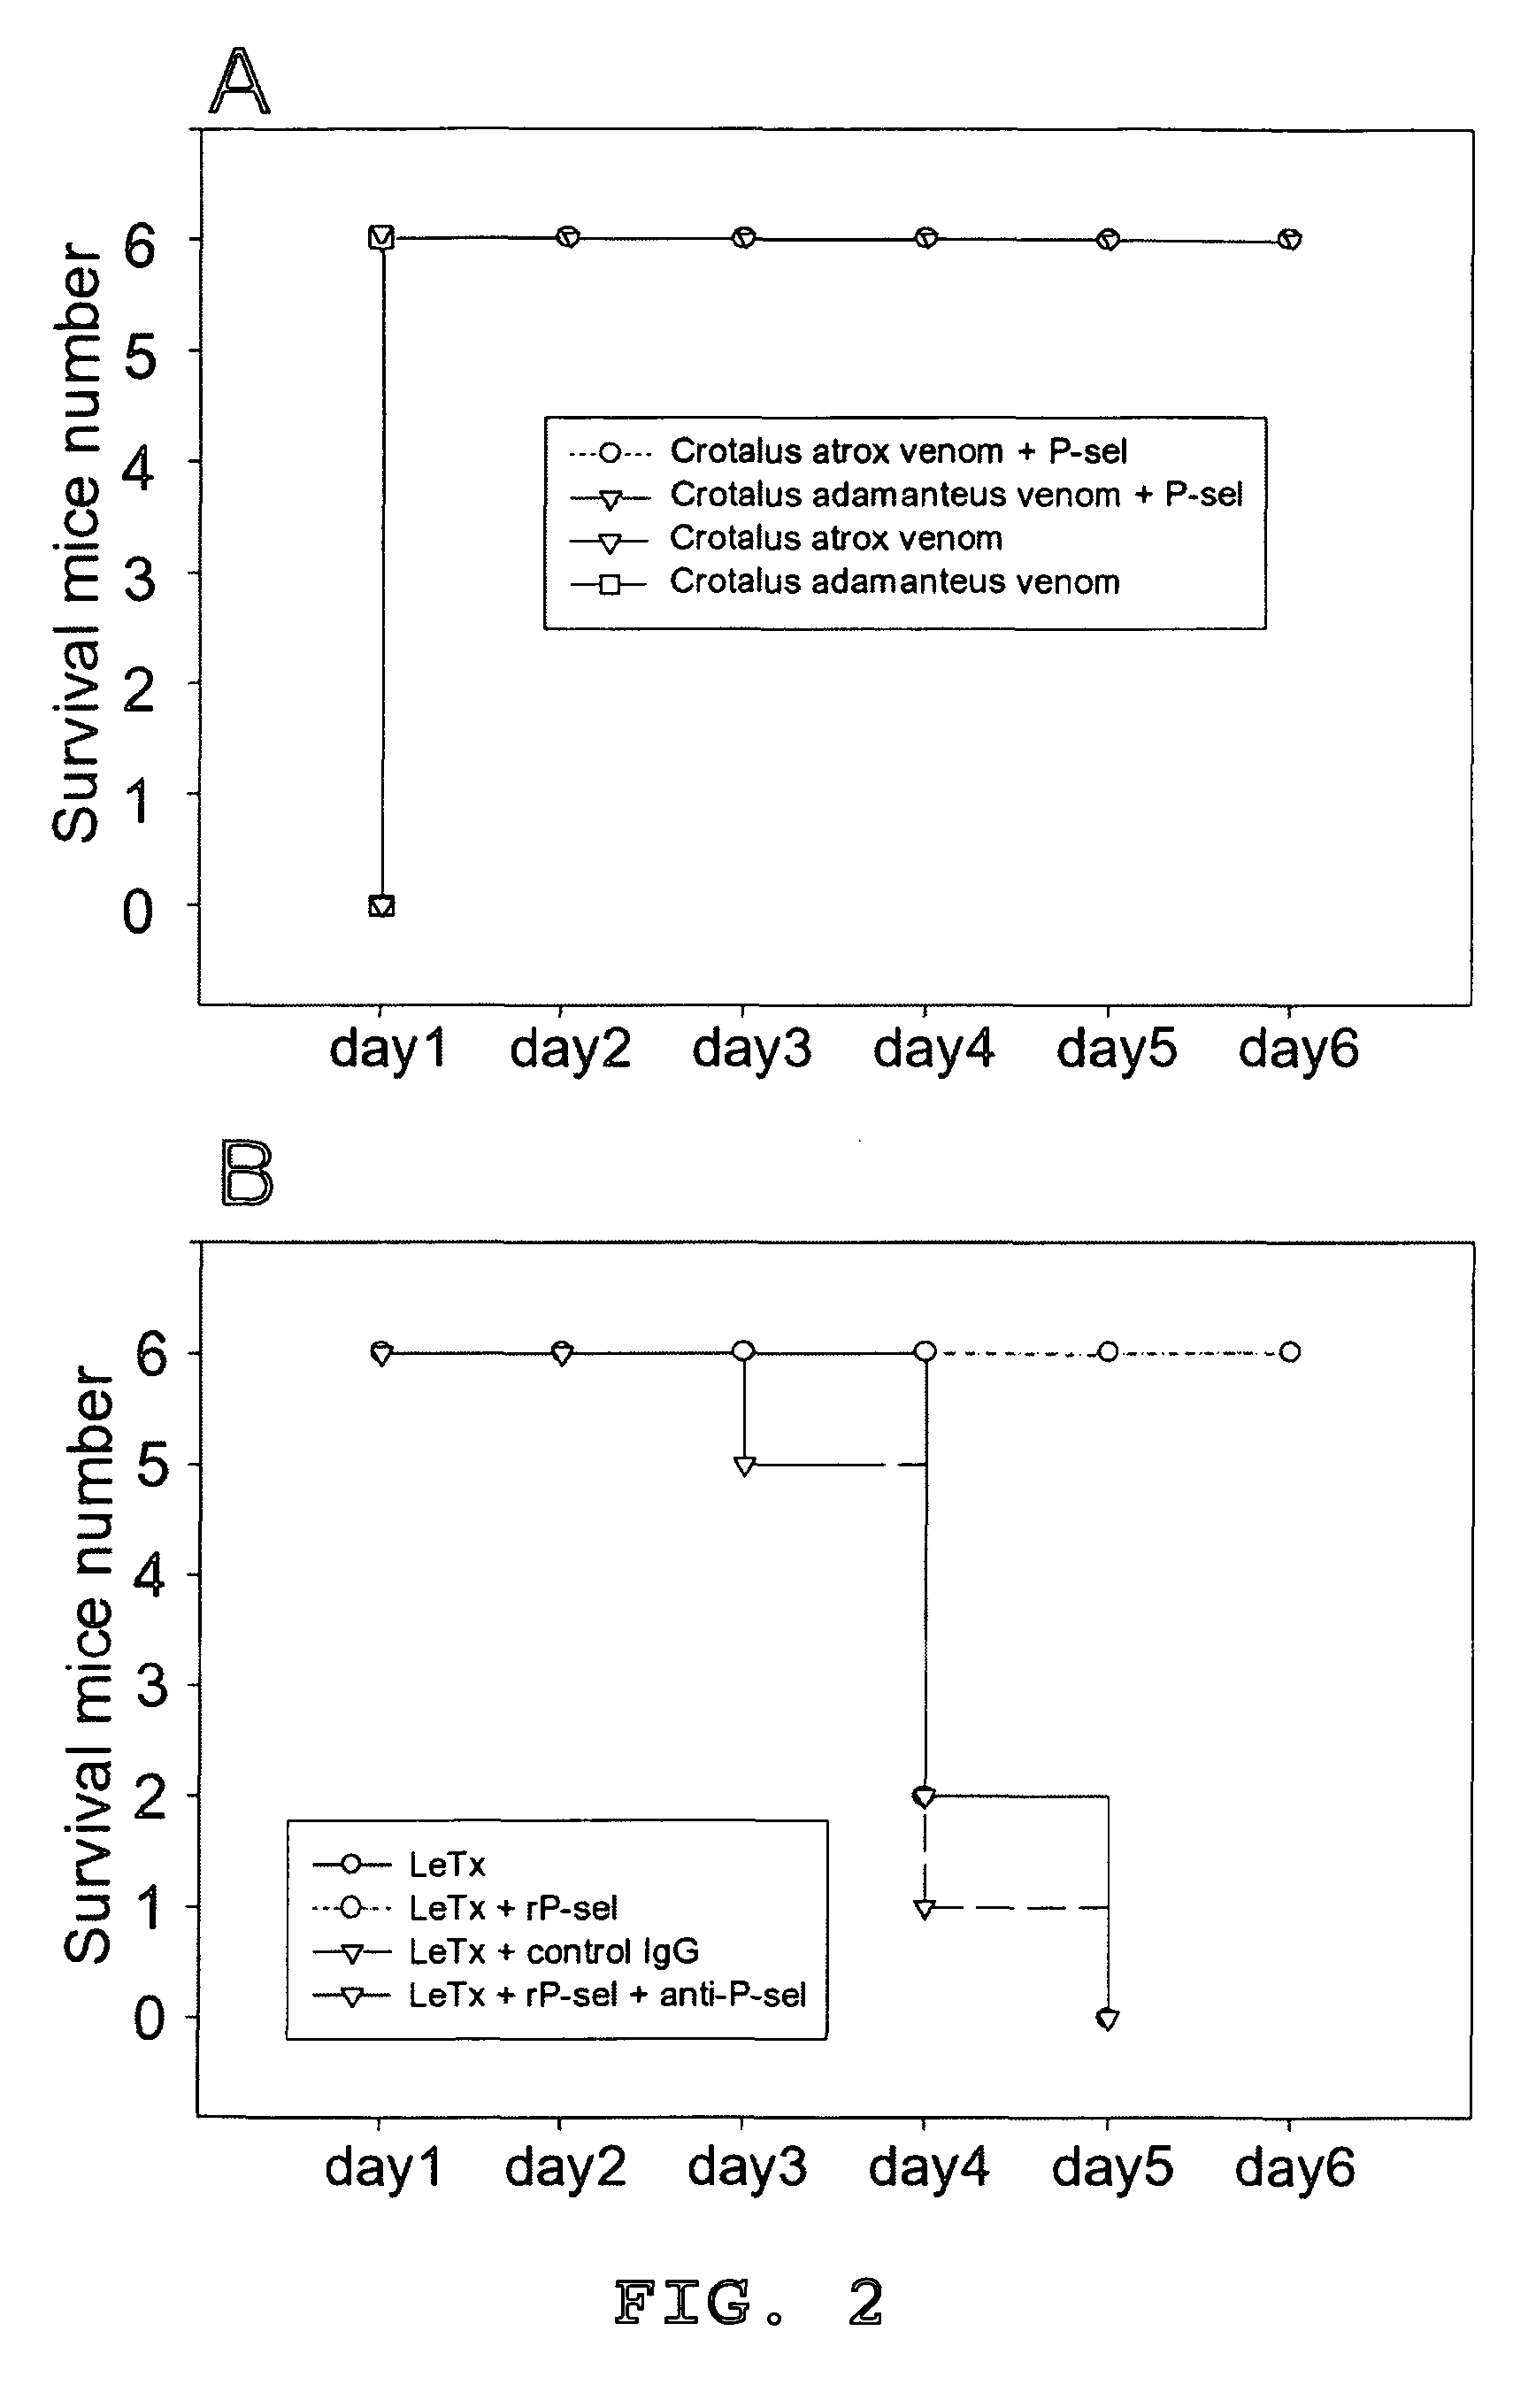 Methods of reducing hypoxic stress in a mammal by administering soluble P-selectin